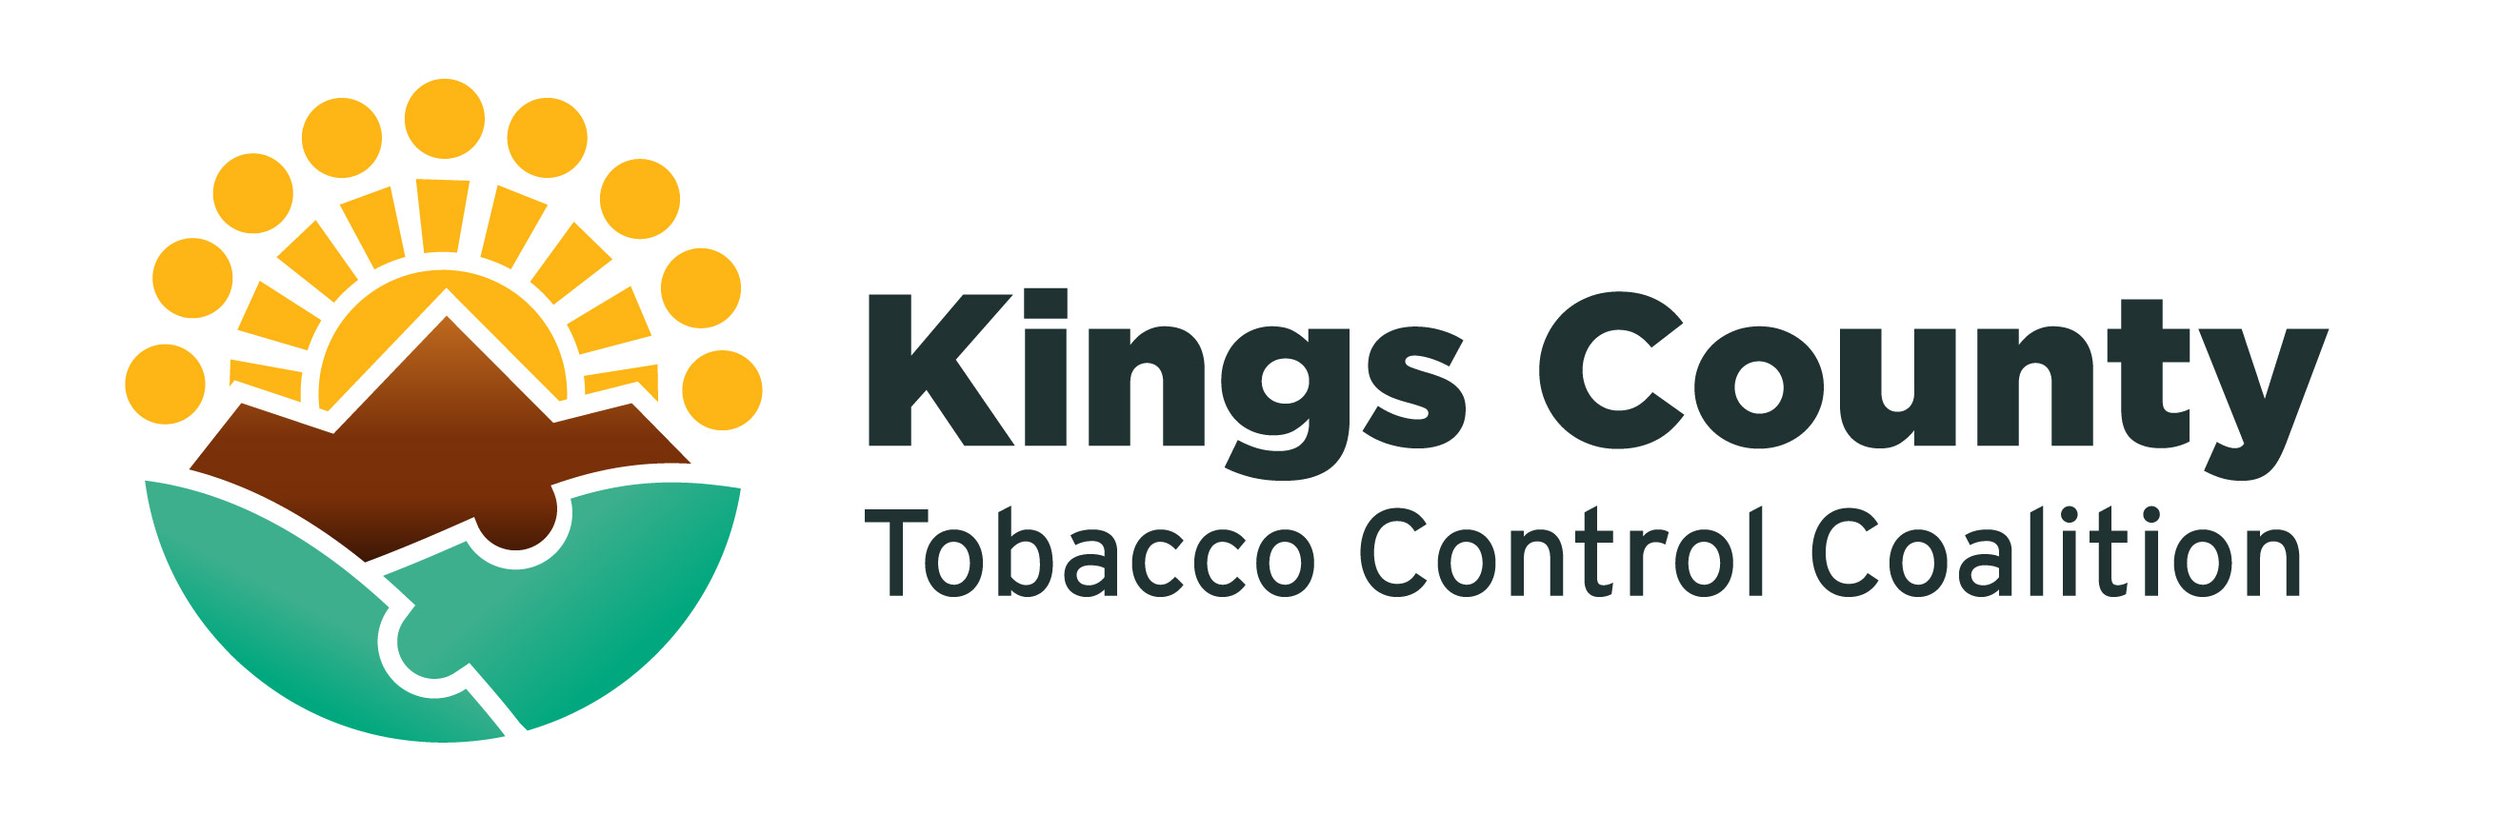 Kings Country Tobacco Control Coalition